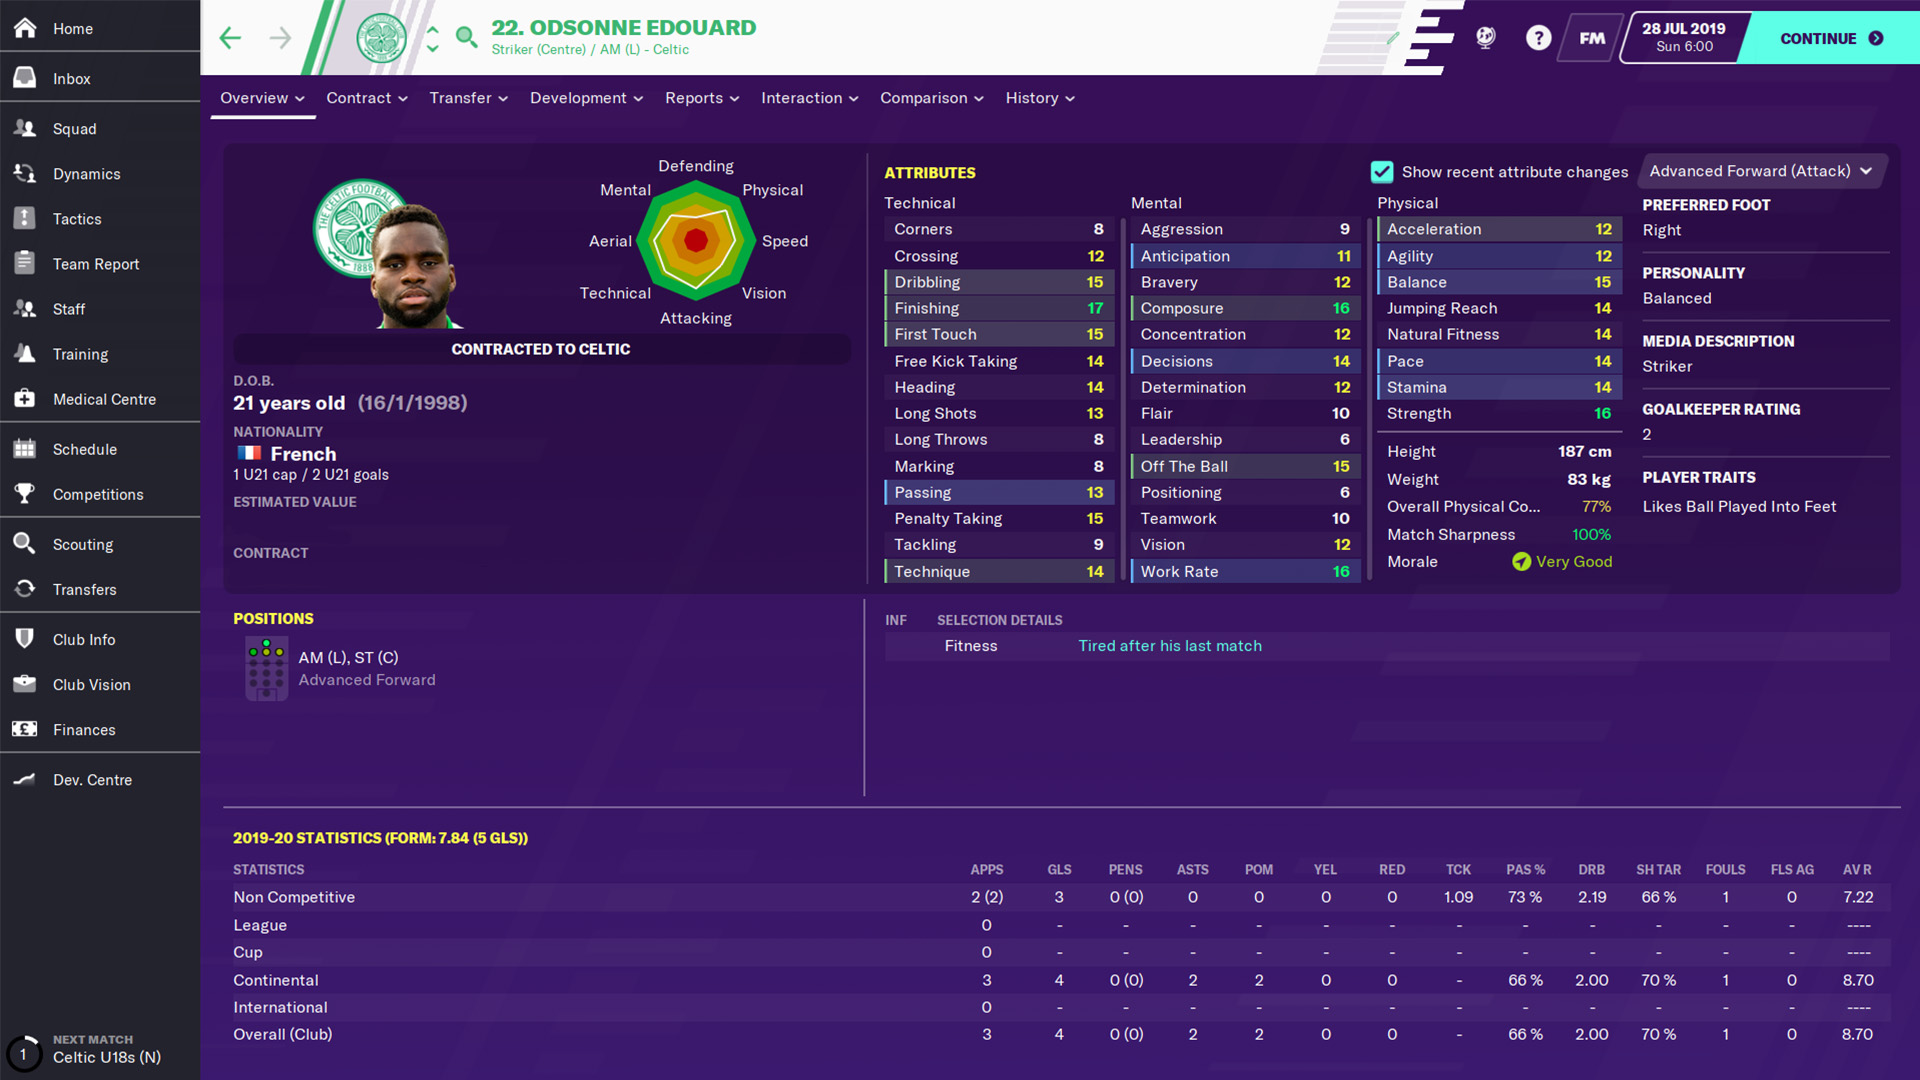 Odsonne Edouard's profile in Football Manager 2020